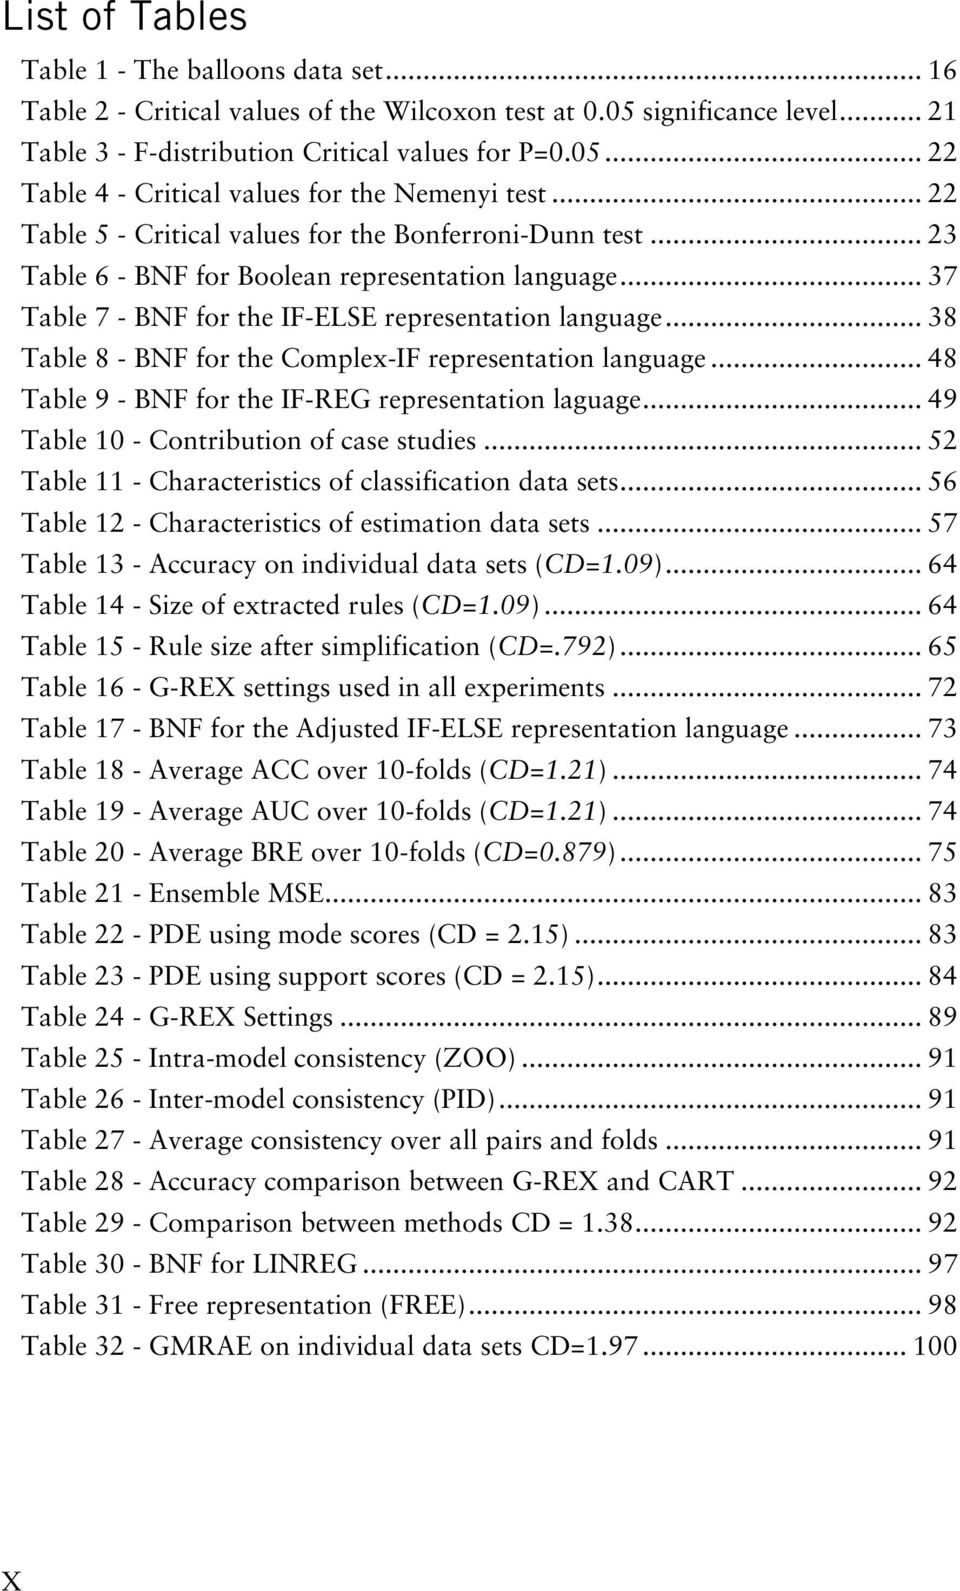 .. 38 Table 8 - BNF for the Complex-IF representation language... 48 Table 9 - BNF for the IF-REG representation laguage... 49 Table 10 - Contribution of case studies.